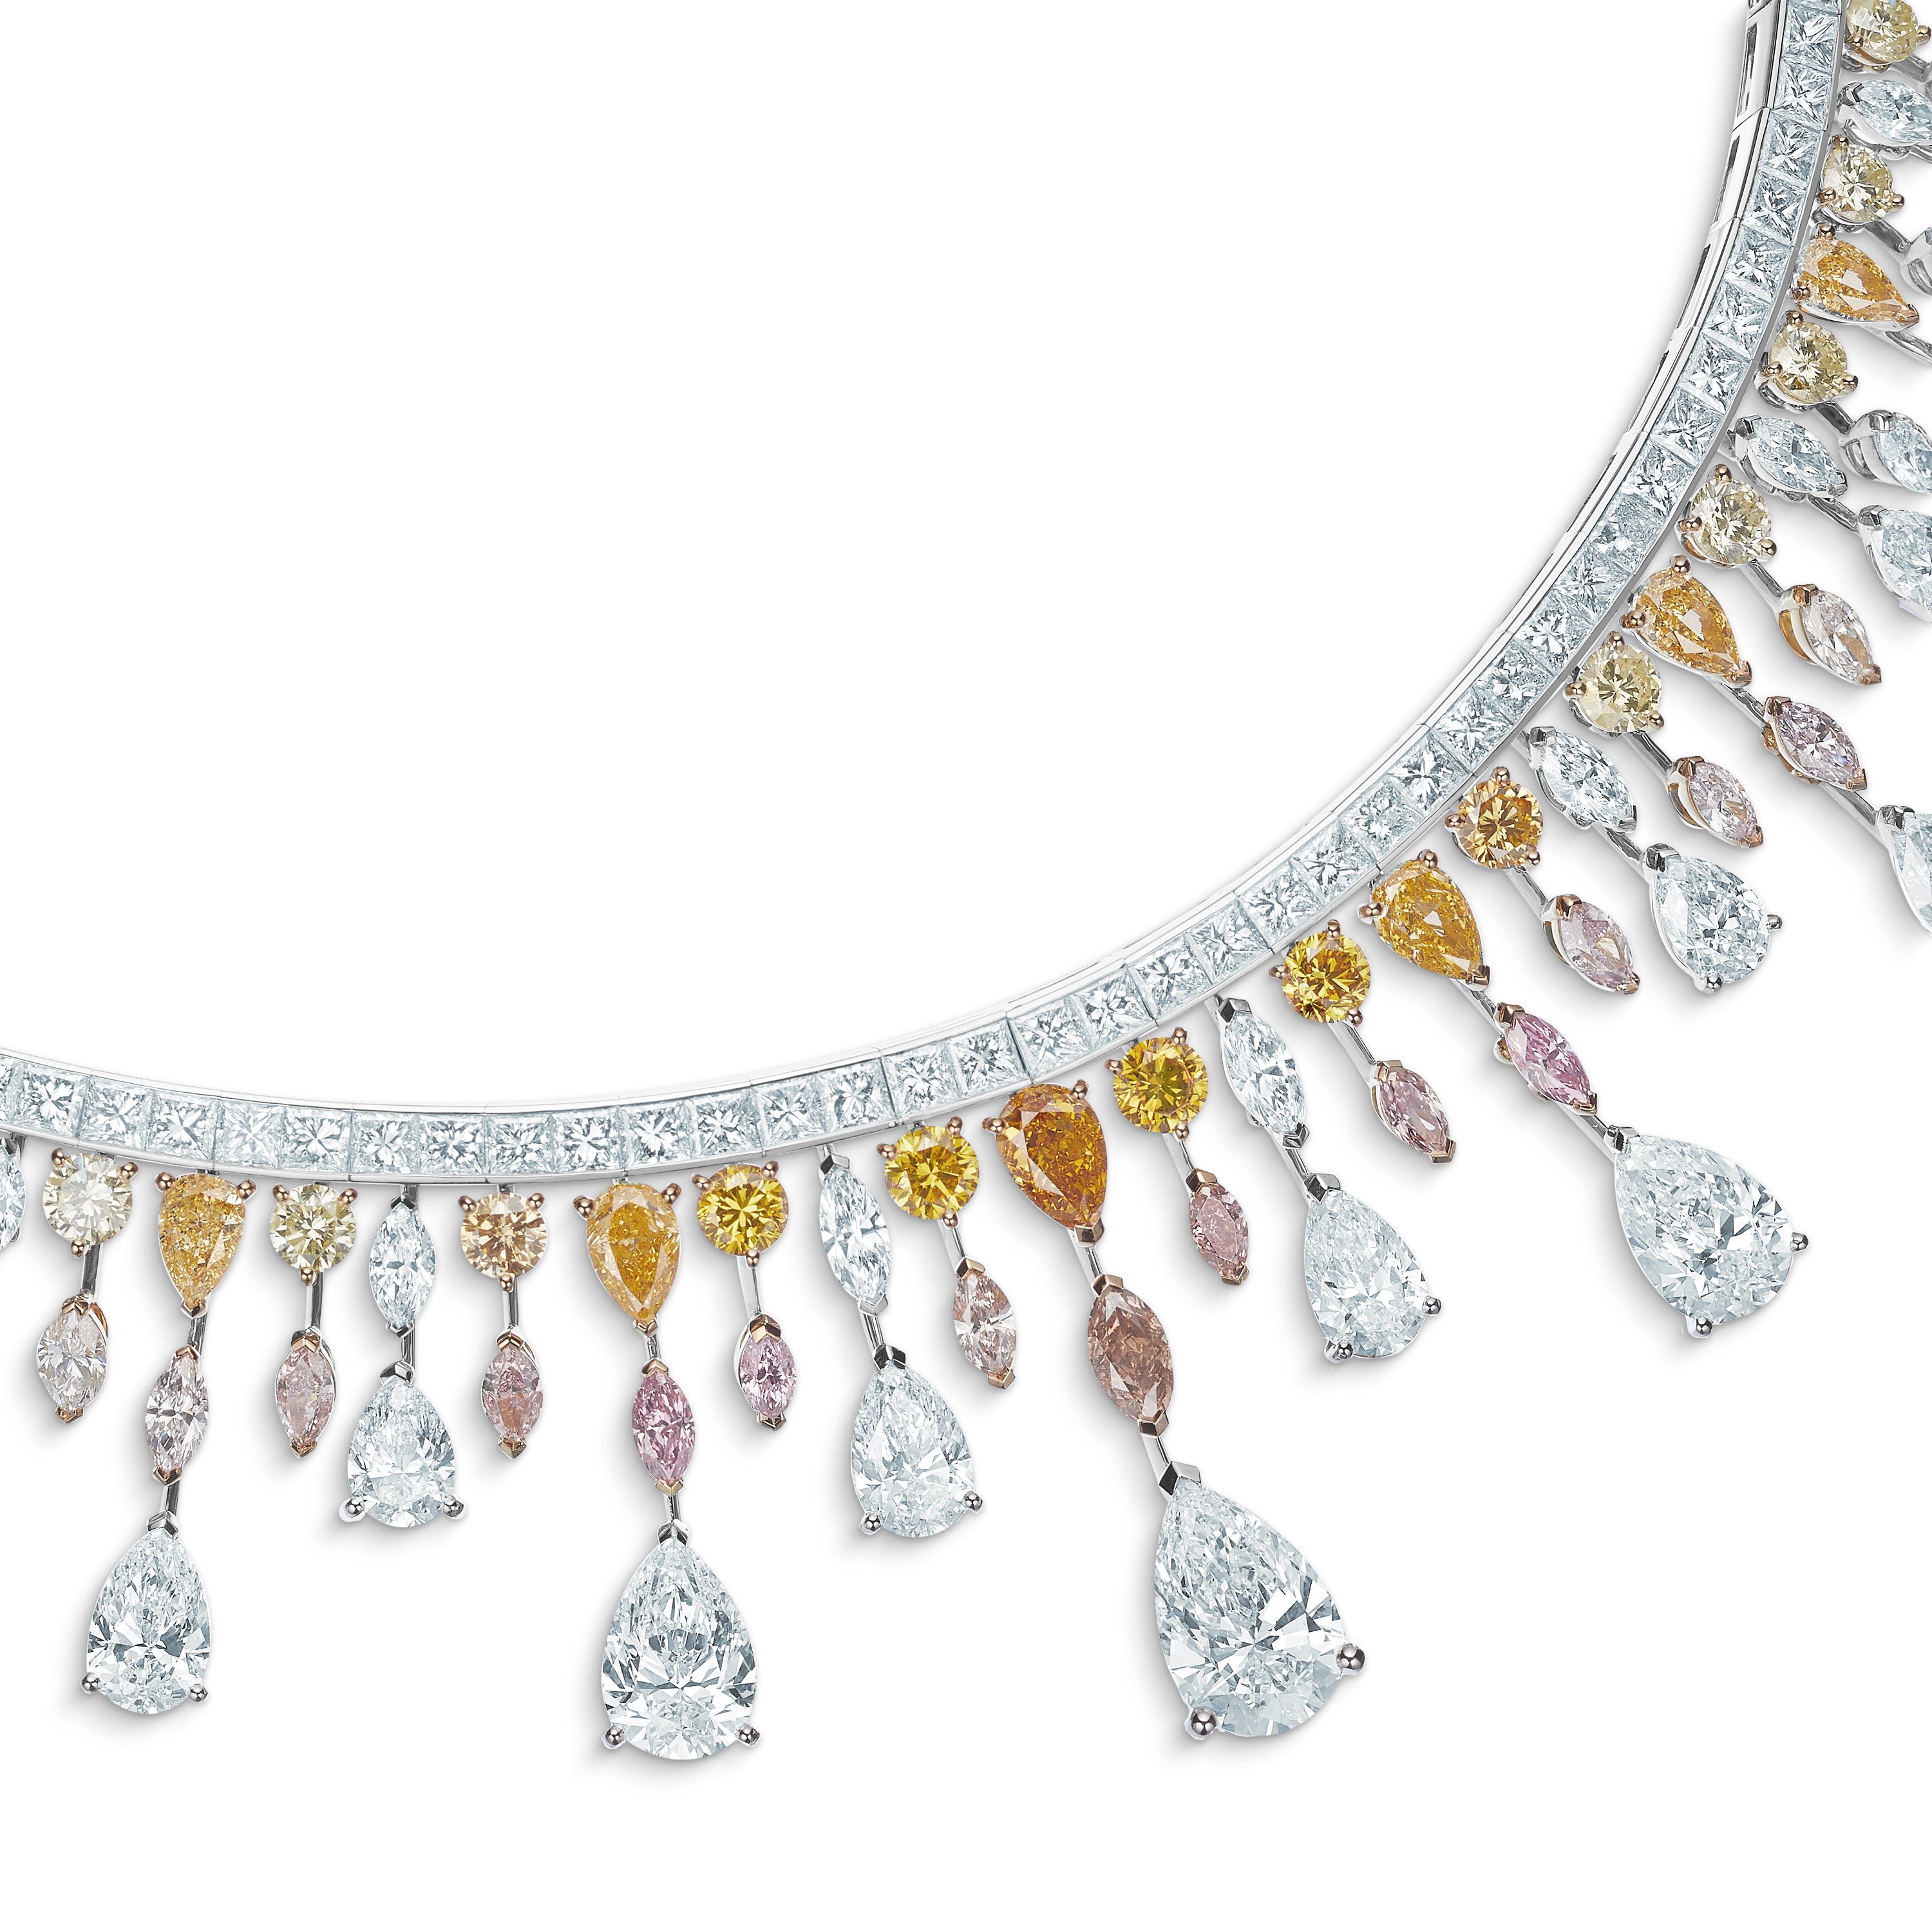 Louis Vuitton's PURE V: The Emblem of High Jewellery